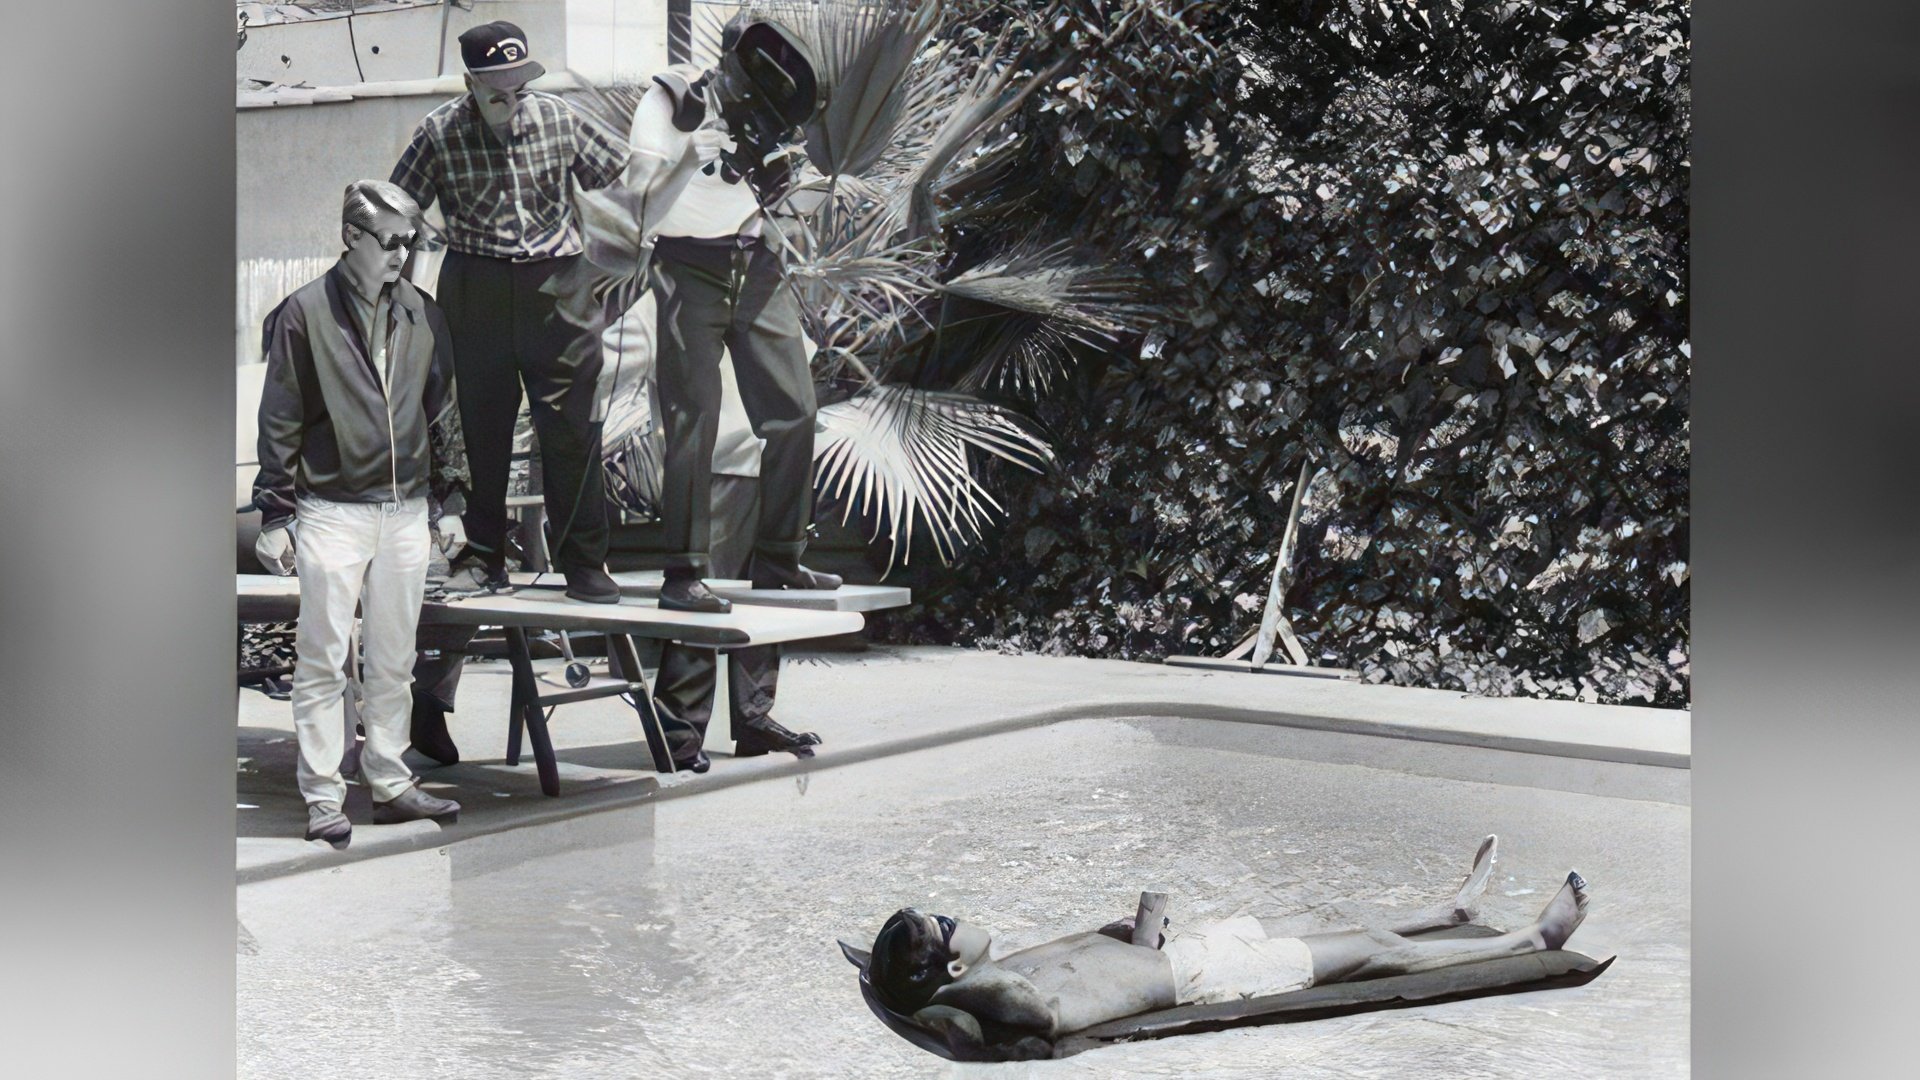 On the set of The Graduate